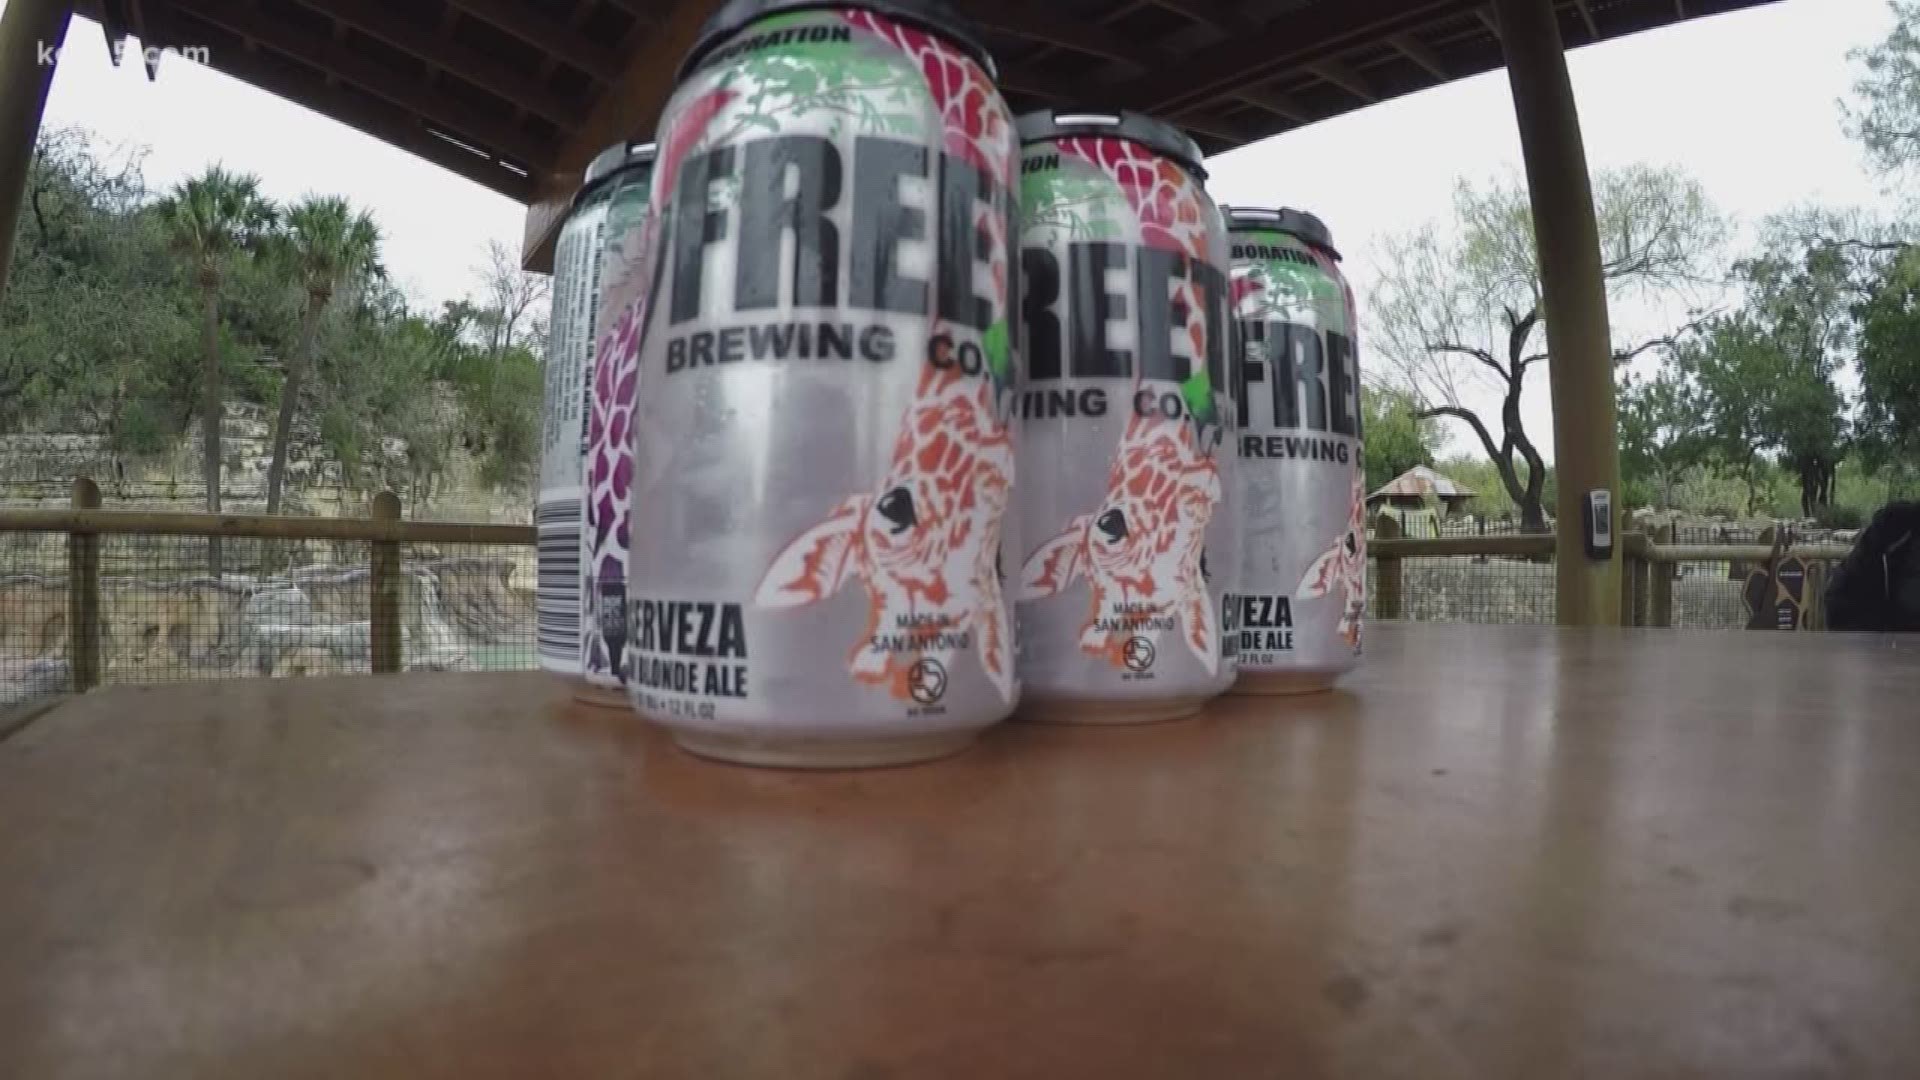 On this National Zoo Lover's Day here's something to cheer about. Freetail Brewing Company, and the San Antonio Zoo partnered up on new beer that has a global impact. Eyewitness News Reporter Henry Ramos has more.